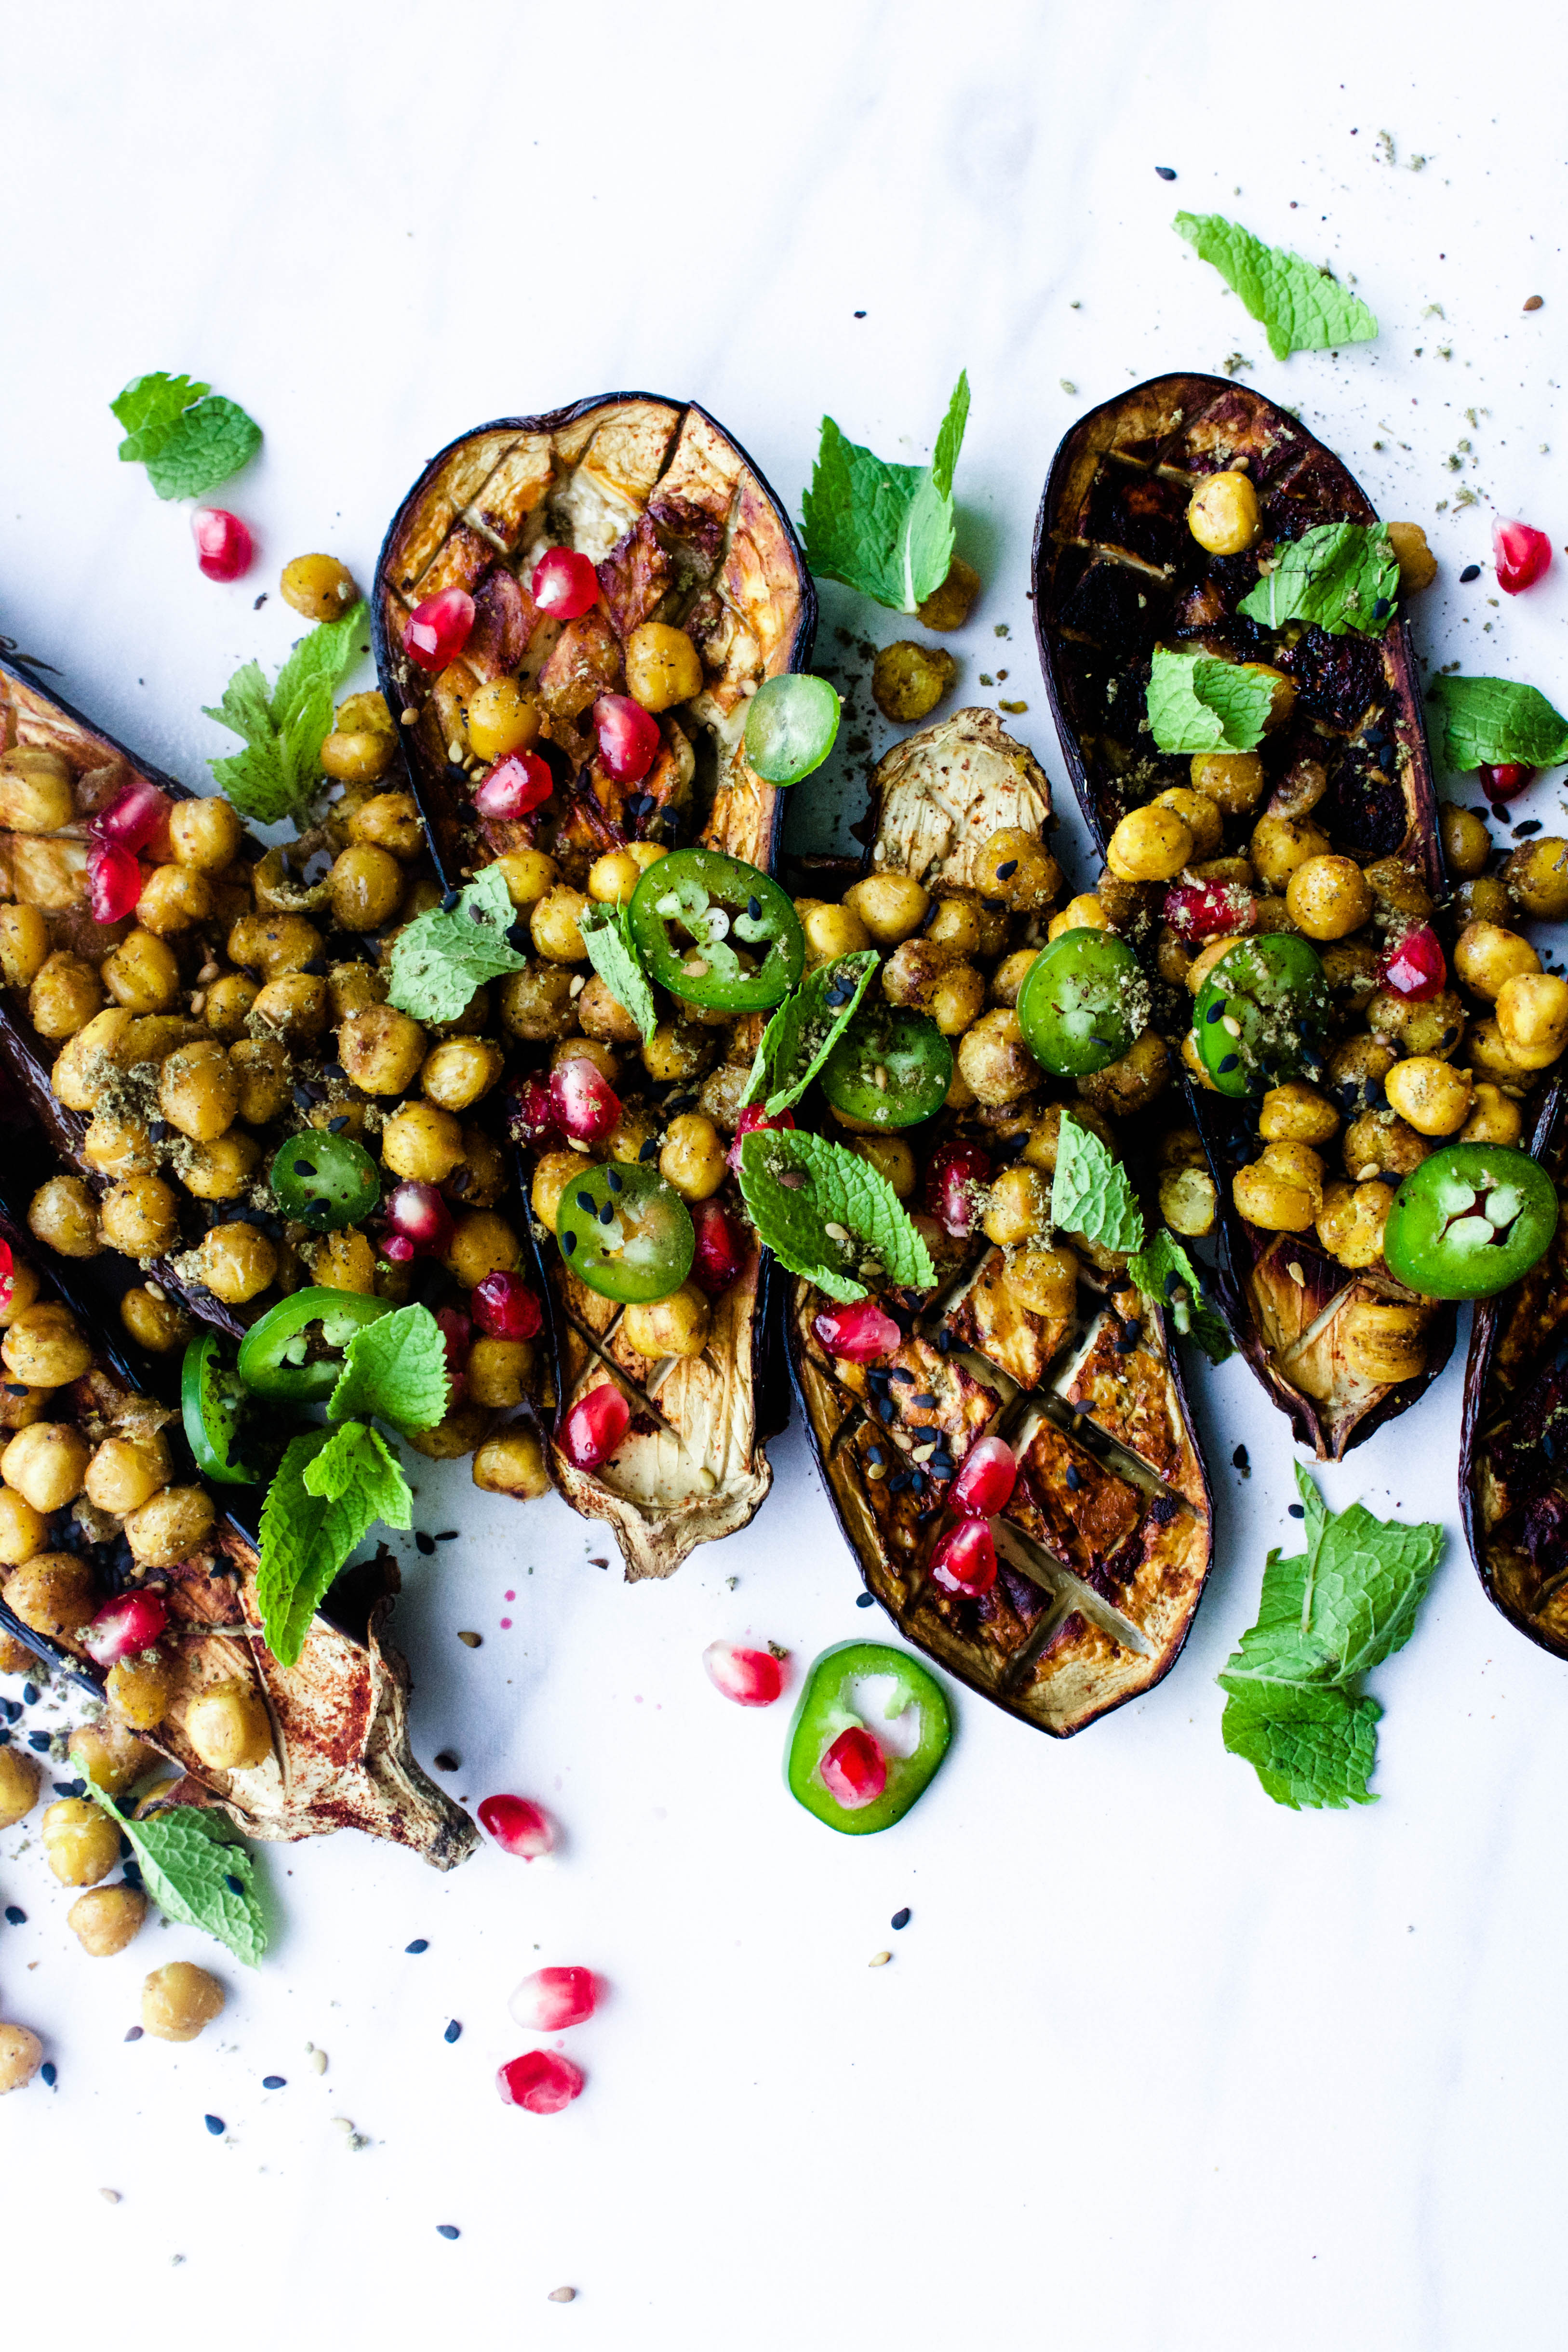 Charred Eggplant w/ Curried Chickpeas